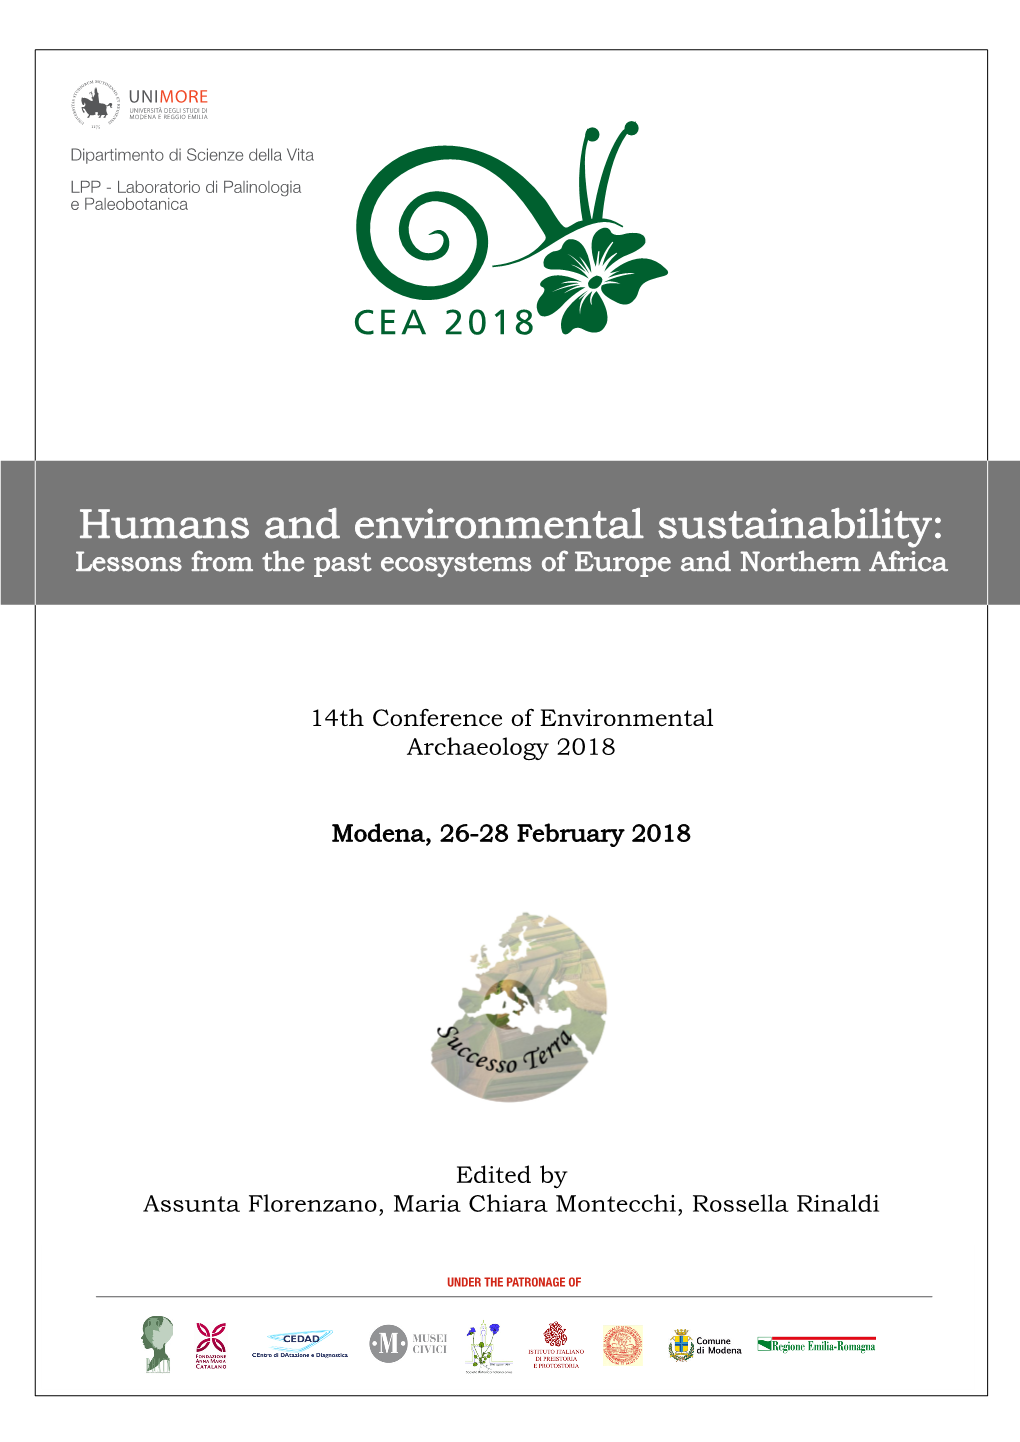 Humans and Environmental Sustainability